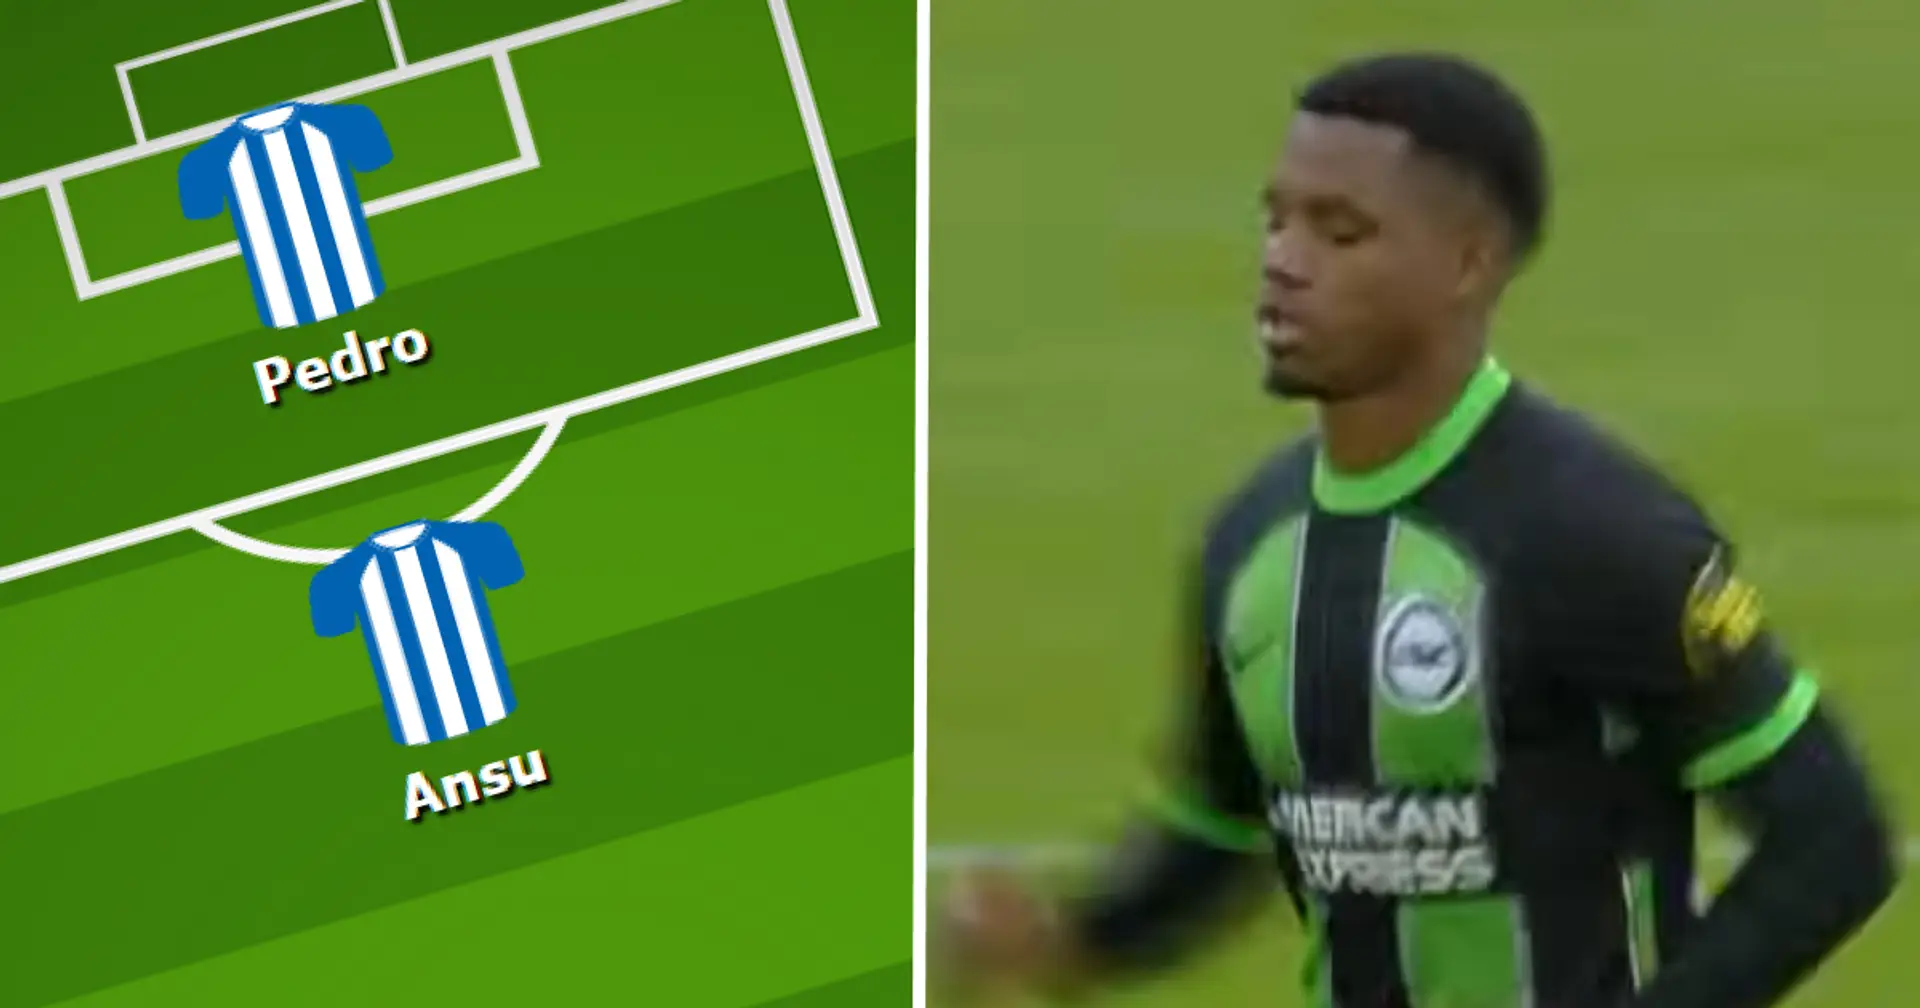 Ansu Fati's stat drops significantly at Brighton - it all but confirms his new role